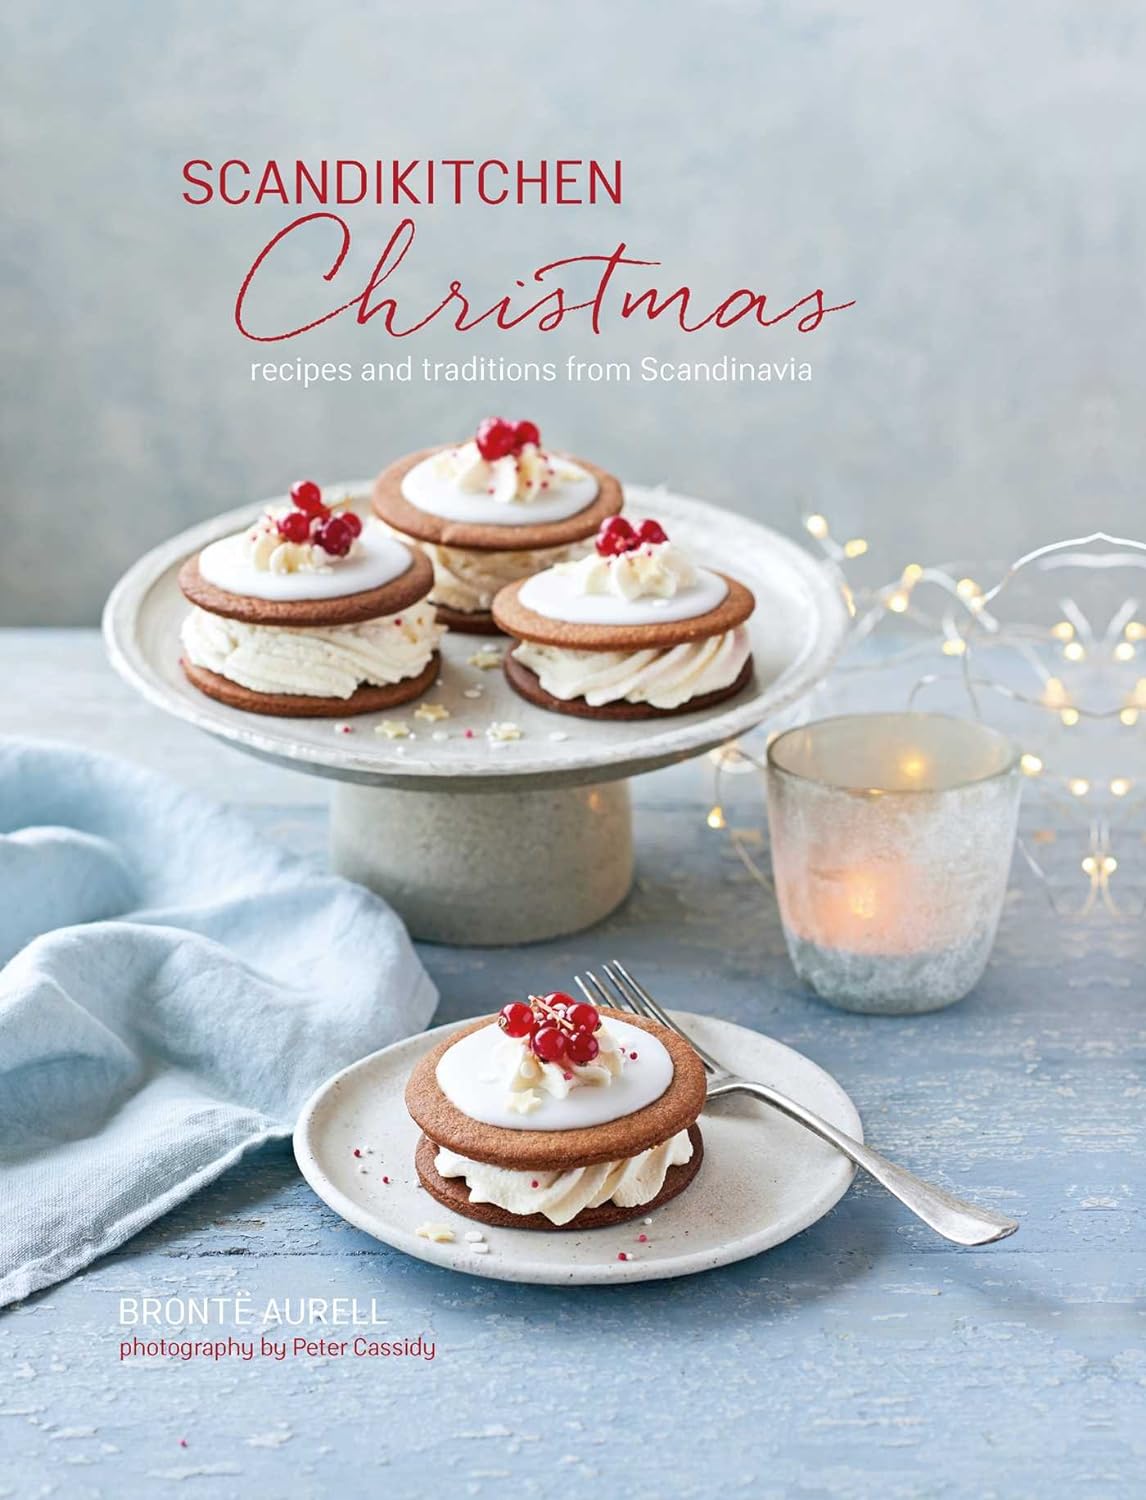 ScandiKitchen Christmas Book: Recipes and traditions from Scandinavia